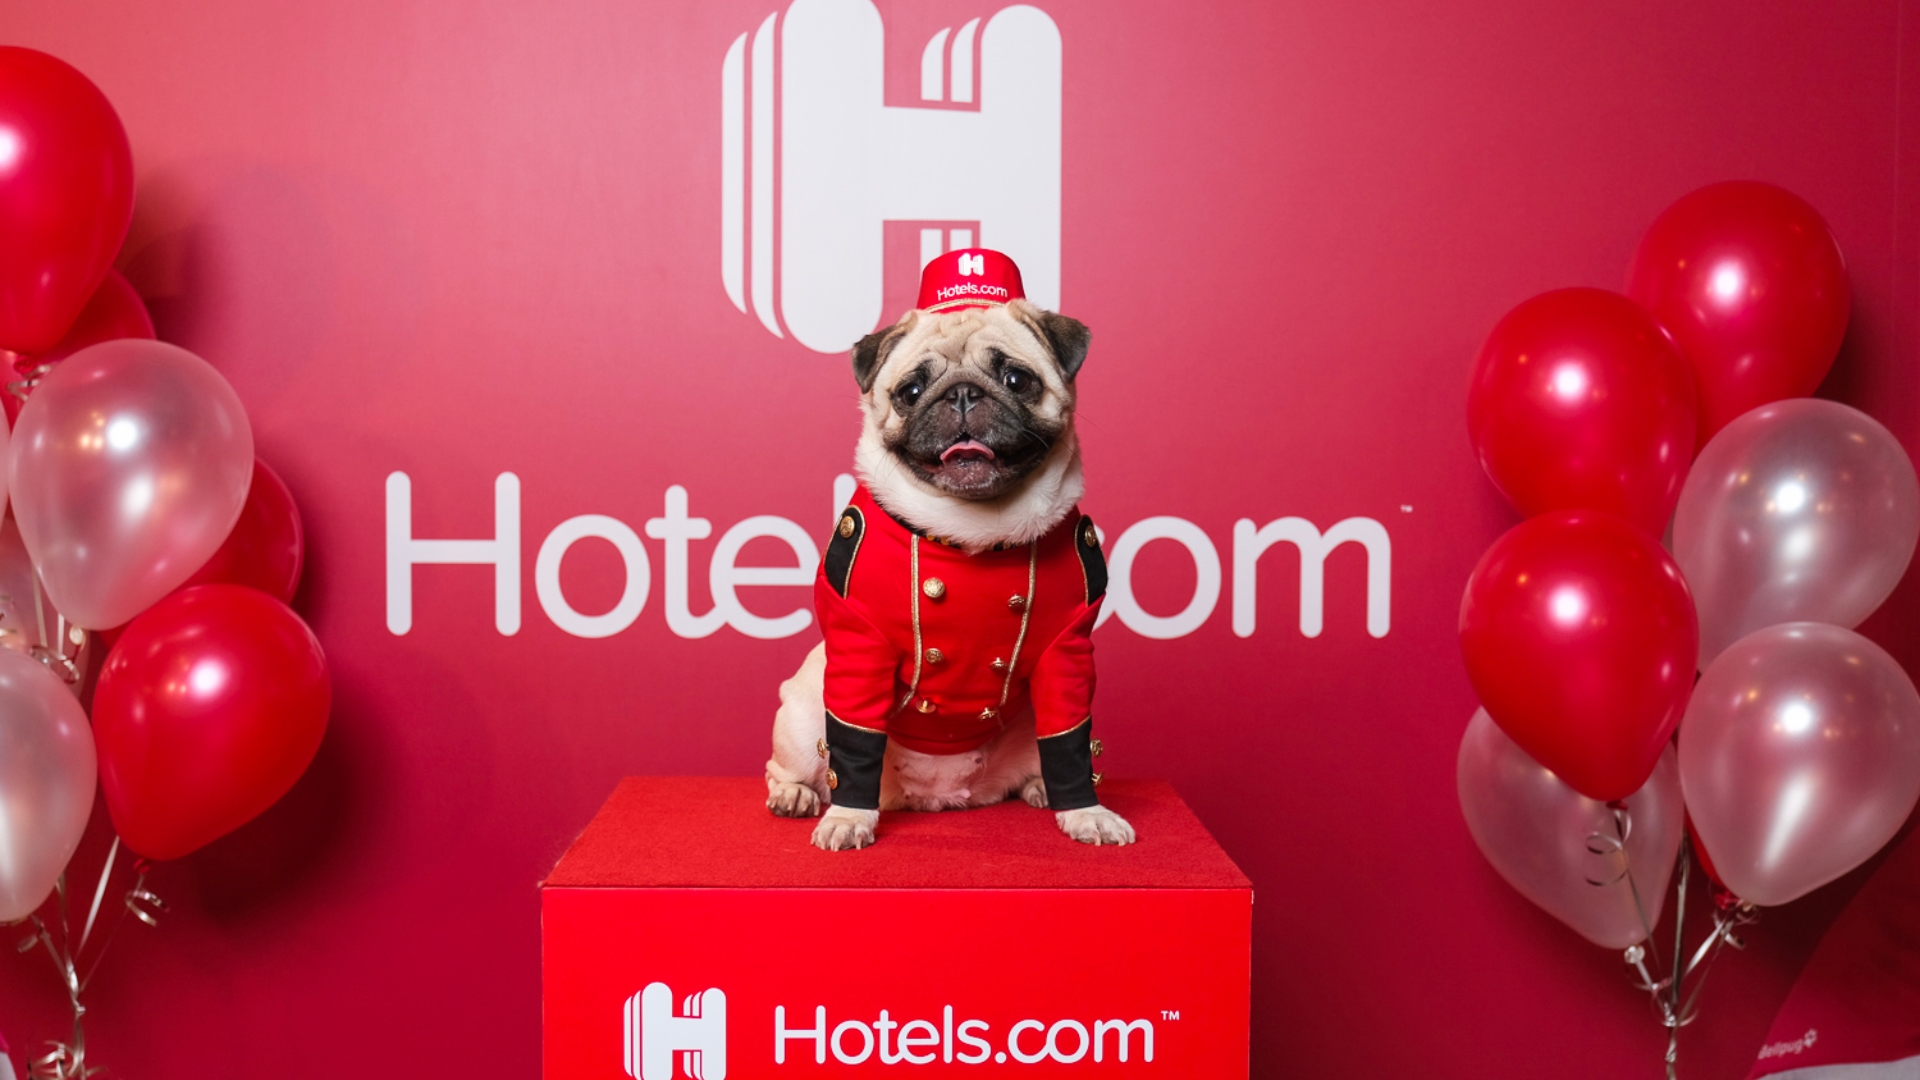 a puppy with hotel guard uniform standing on the red box, red ballon on the left and right side, and red wall background with hotels.com white logo on it